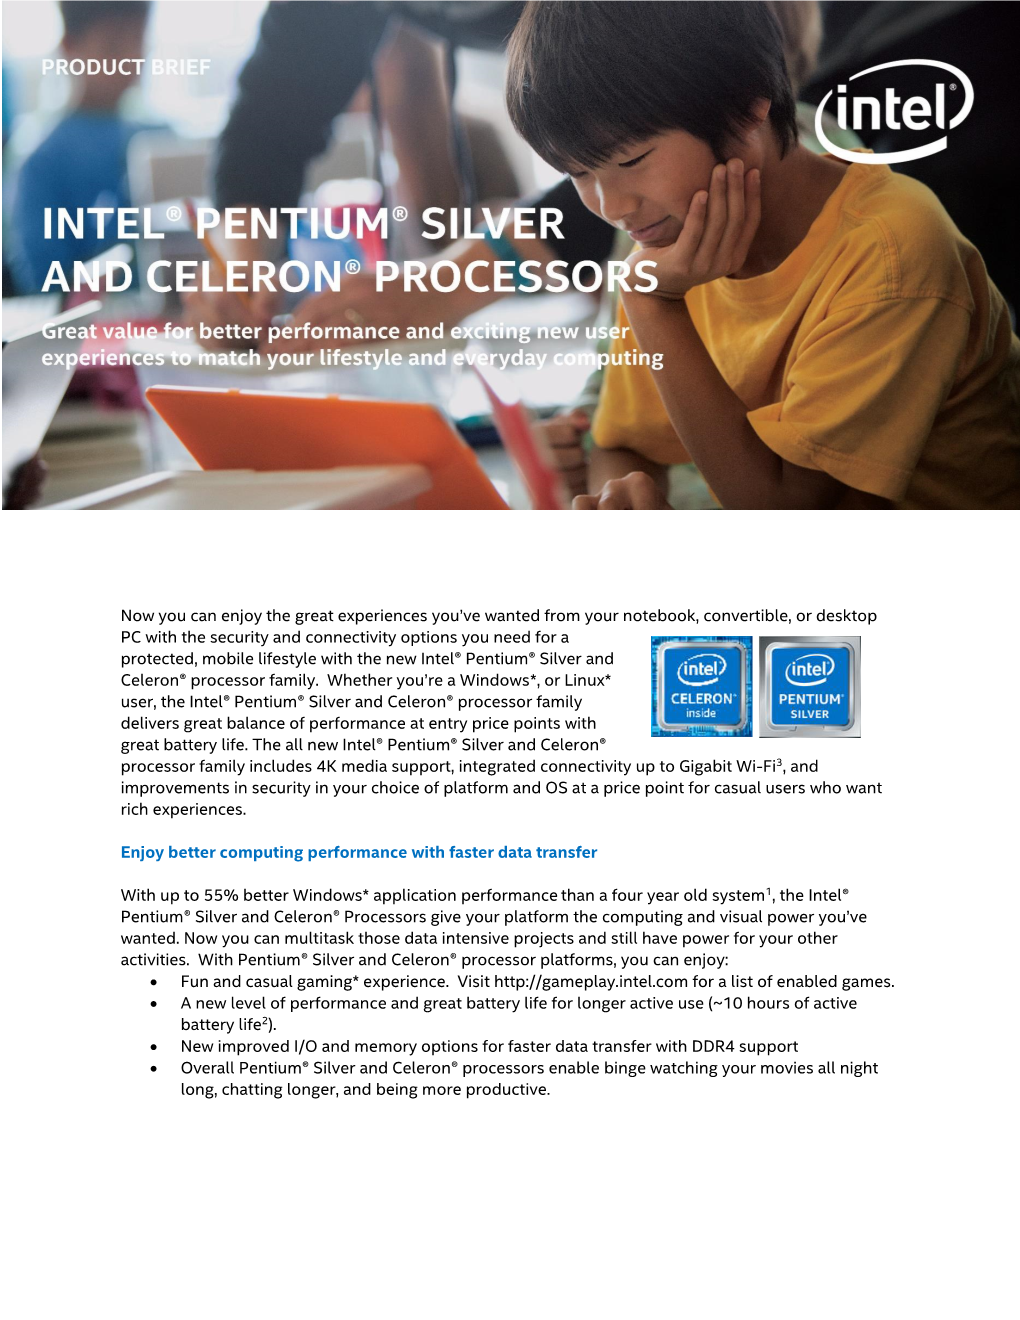 Intel® Pentium® Silver and Celeron® Processors Give Your Platform the Computing and Visual Power You’Ve Wanted